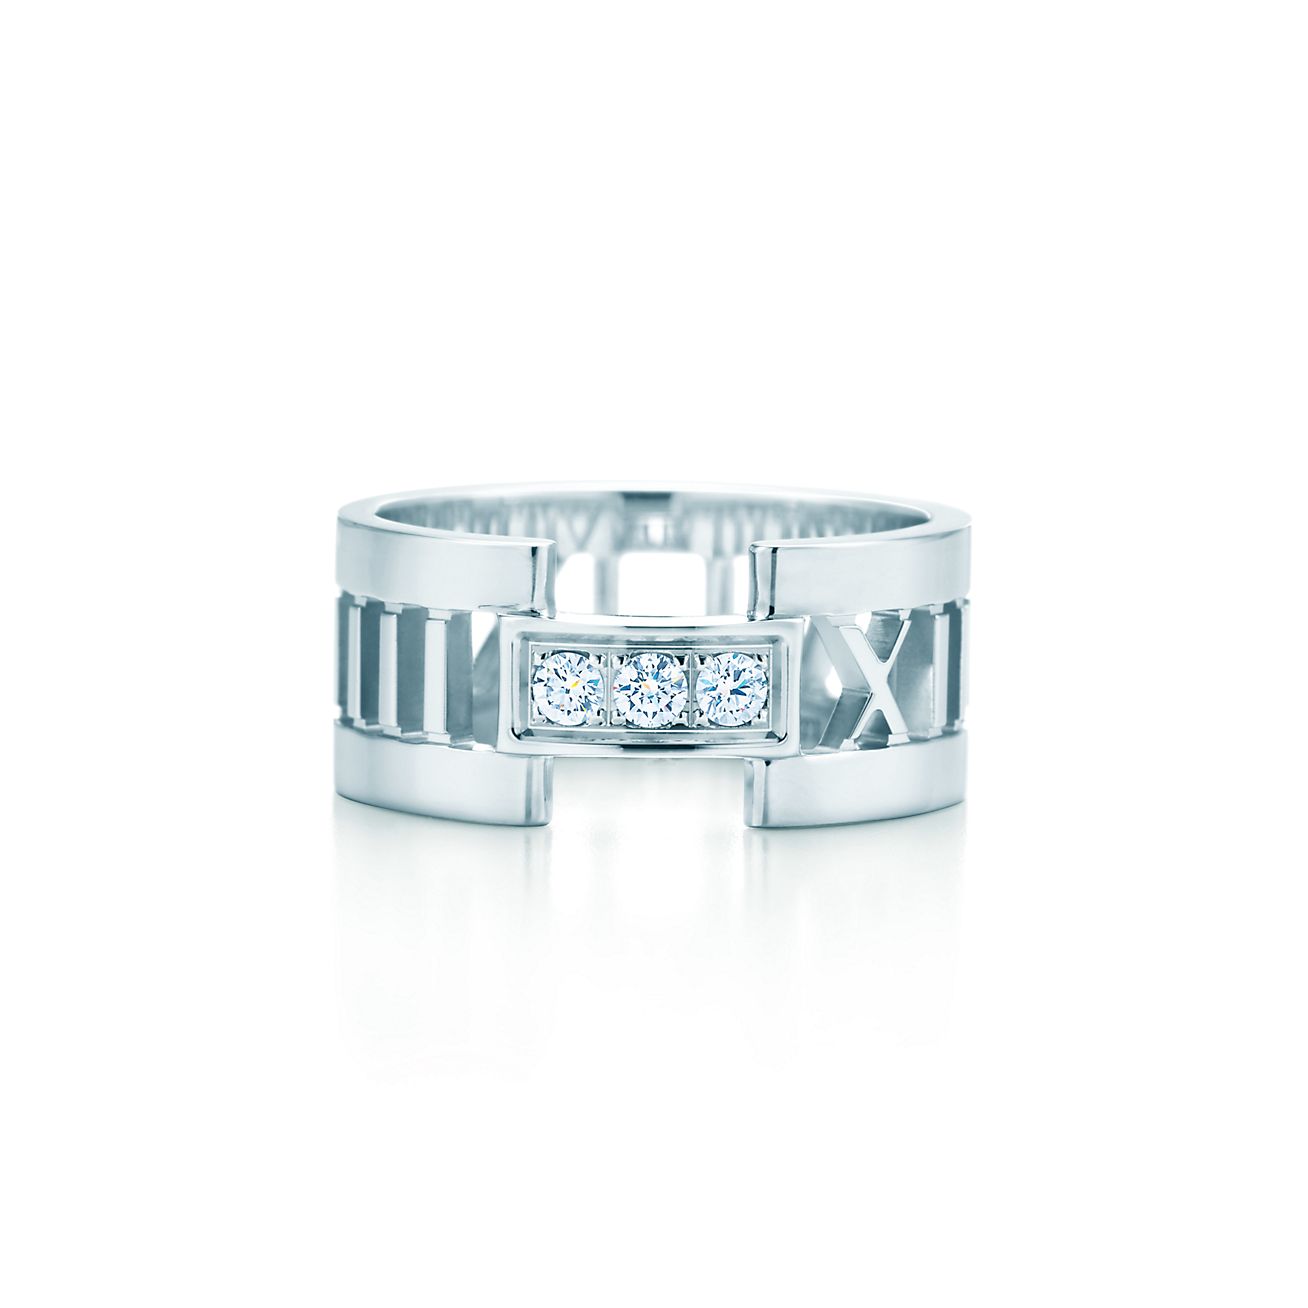 Atlas® open ring in 18k white gold with 